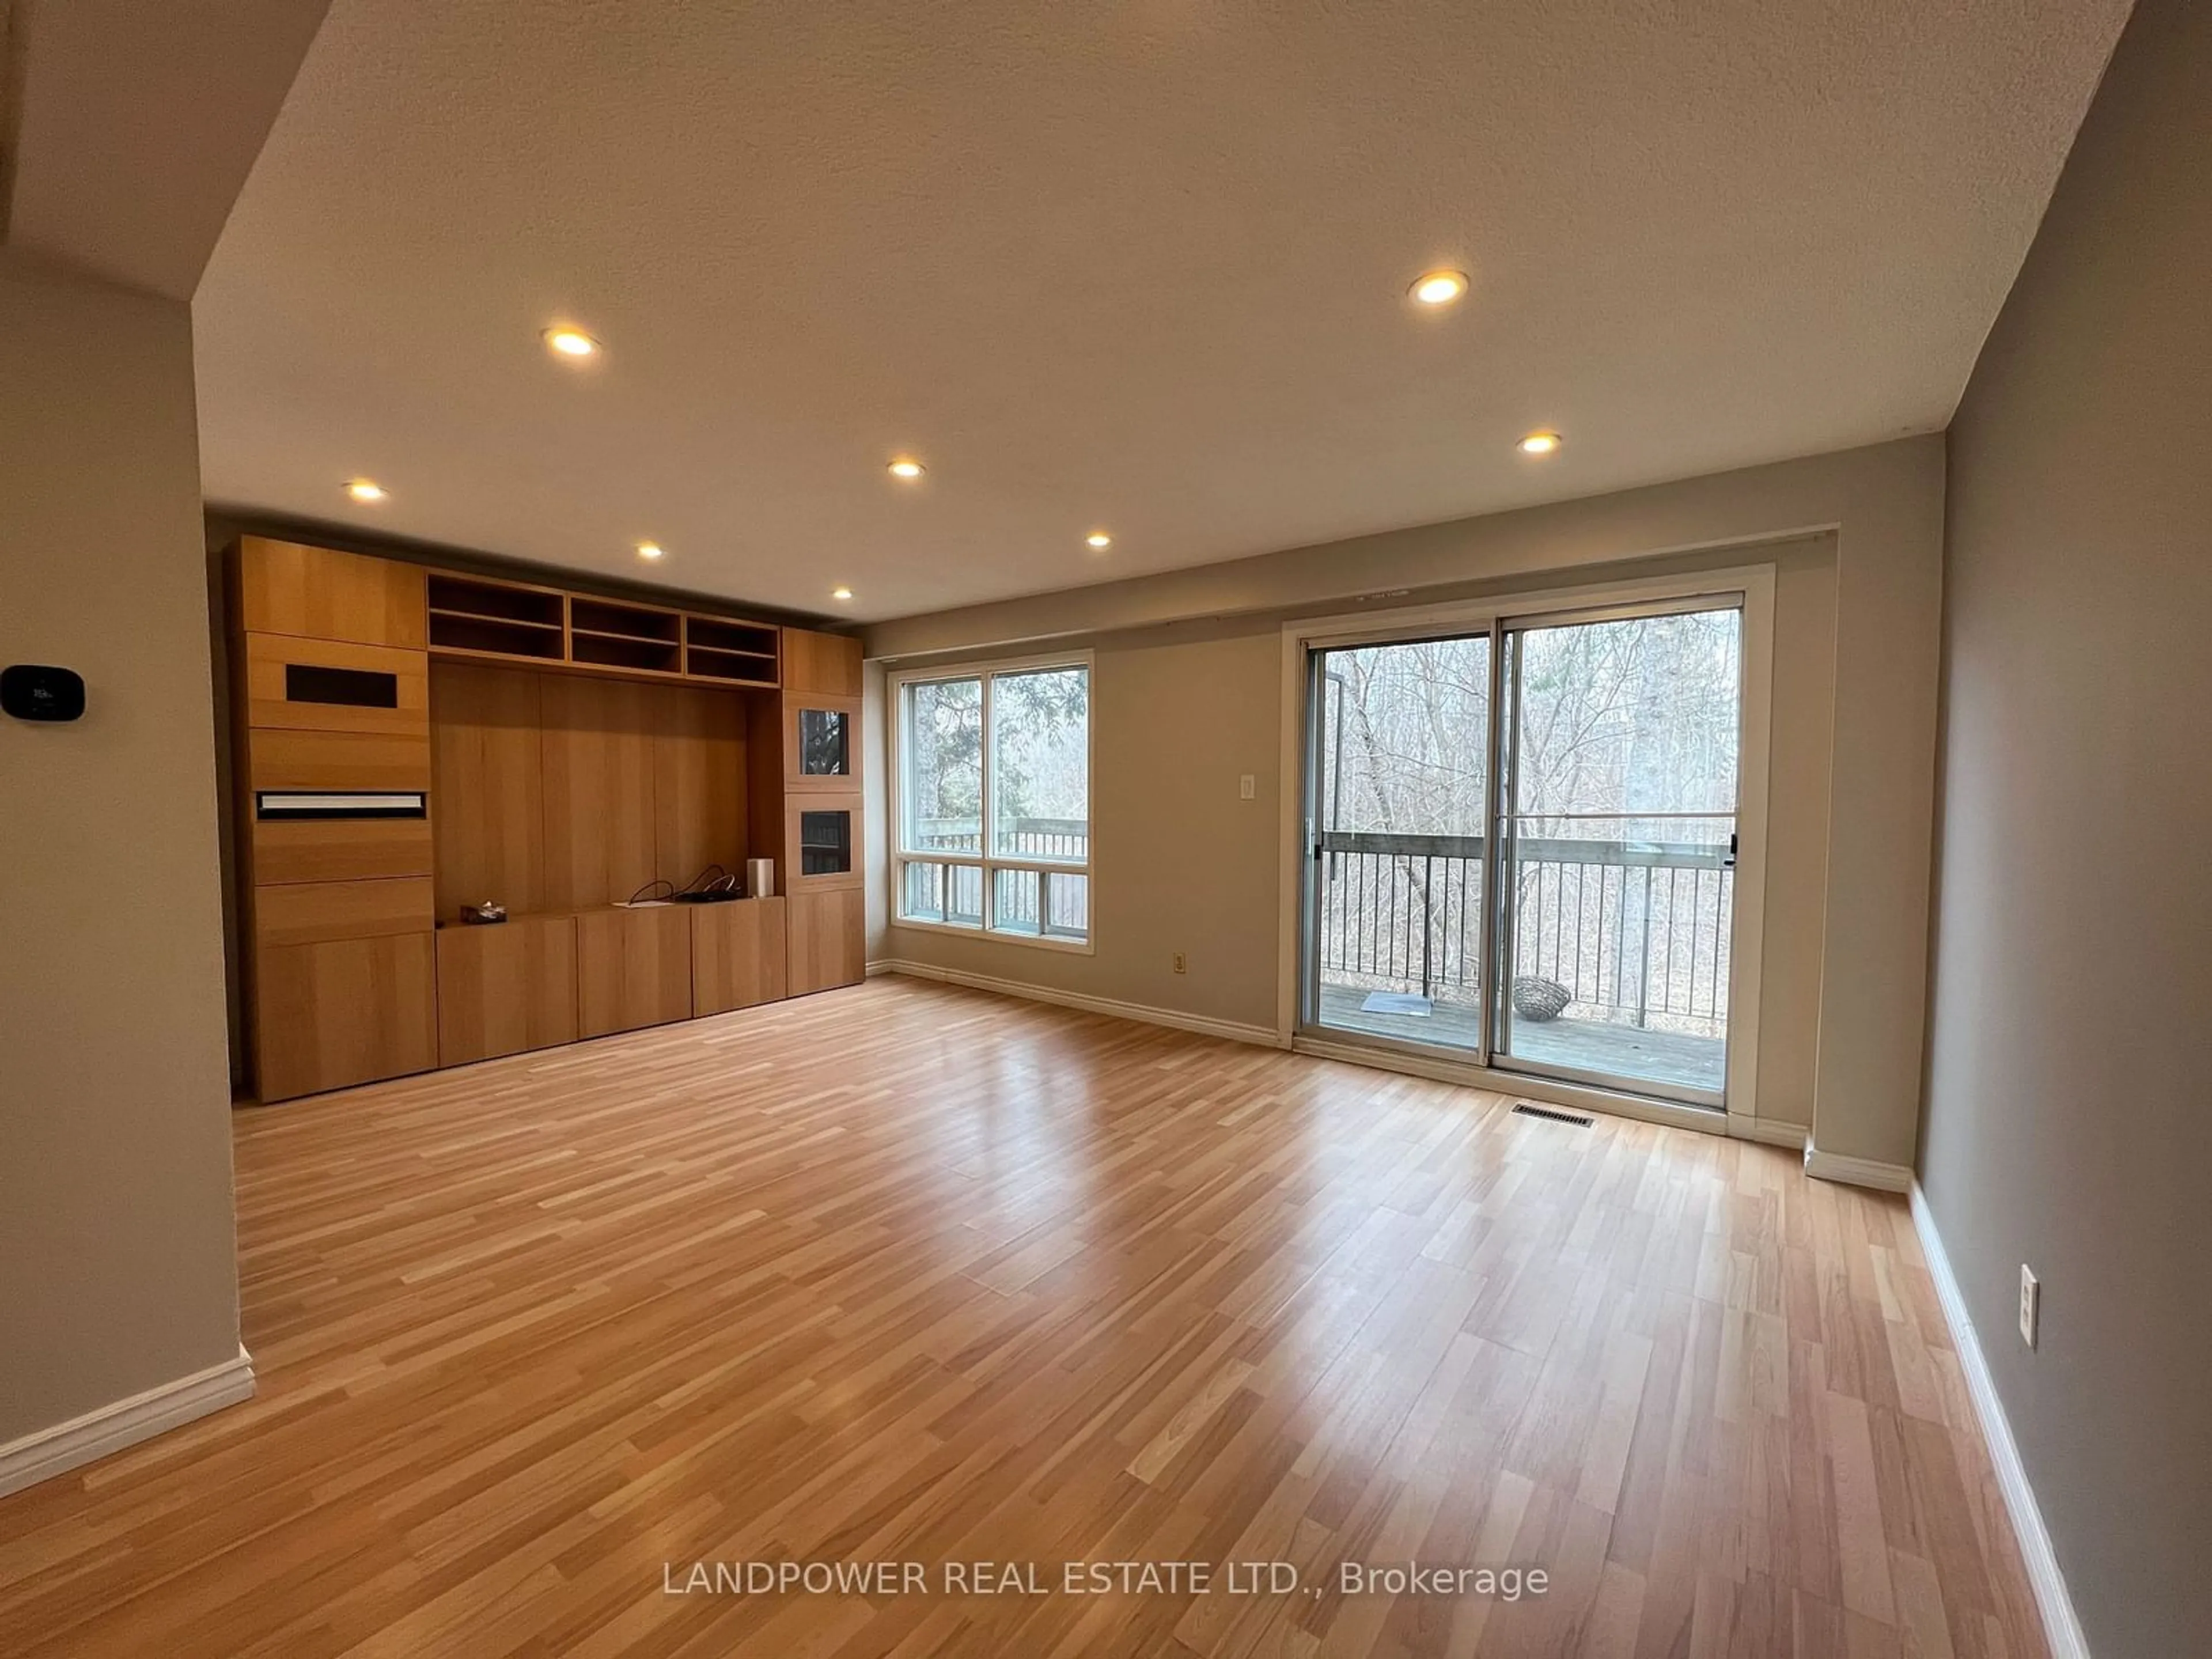 Other indoor space for 86 Farm Green Way, Toronto Ontario M3A 3M2